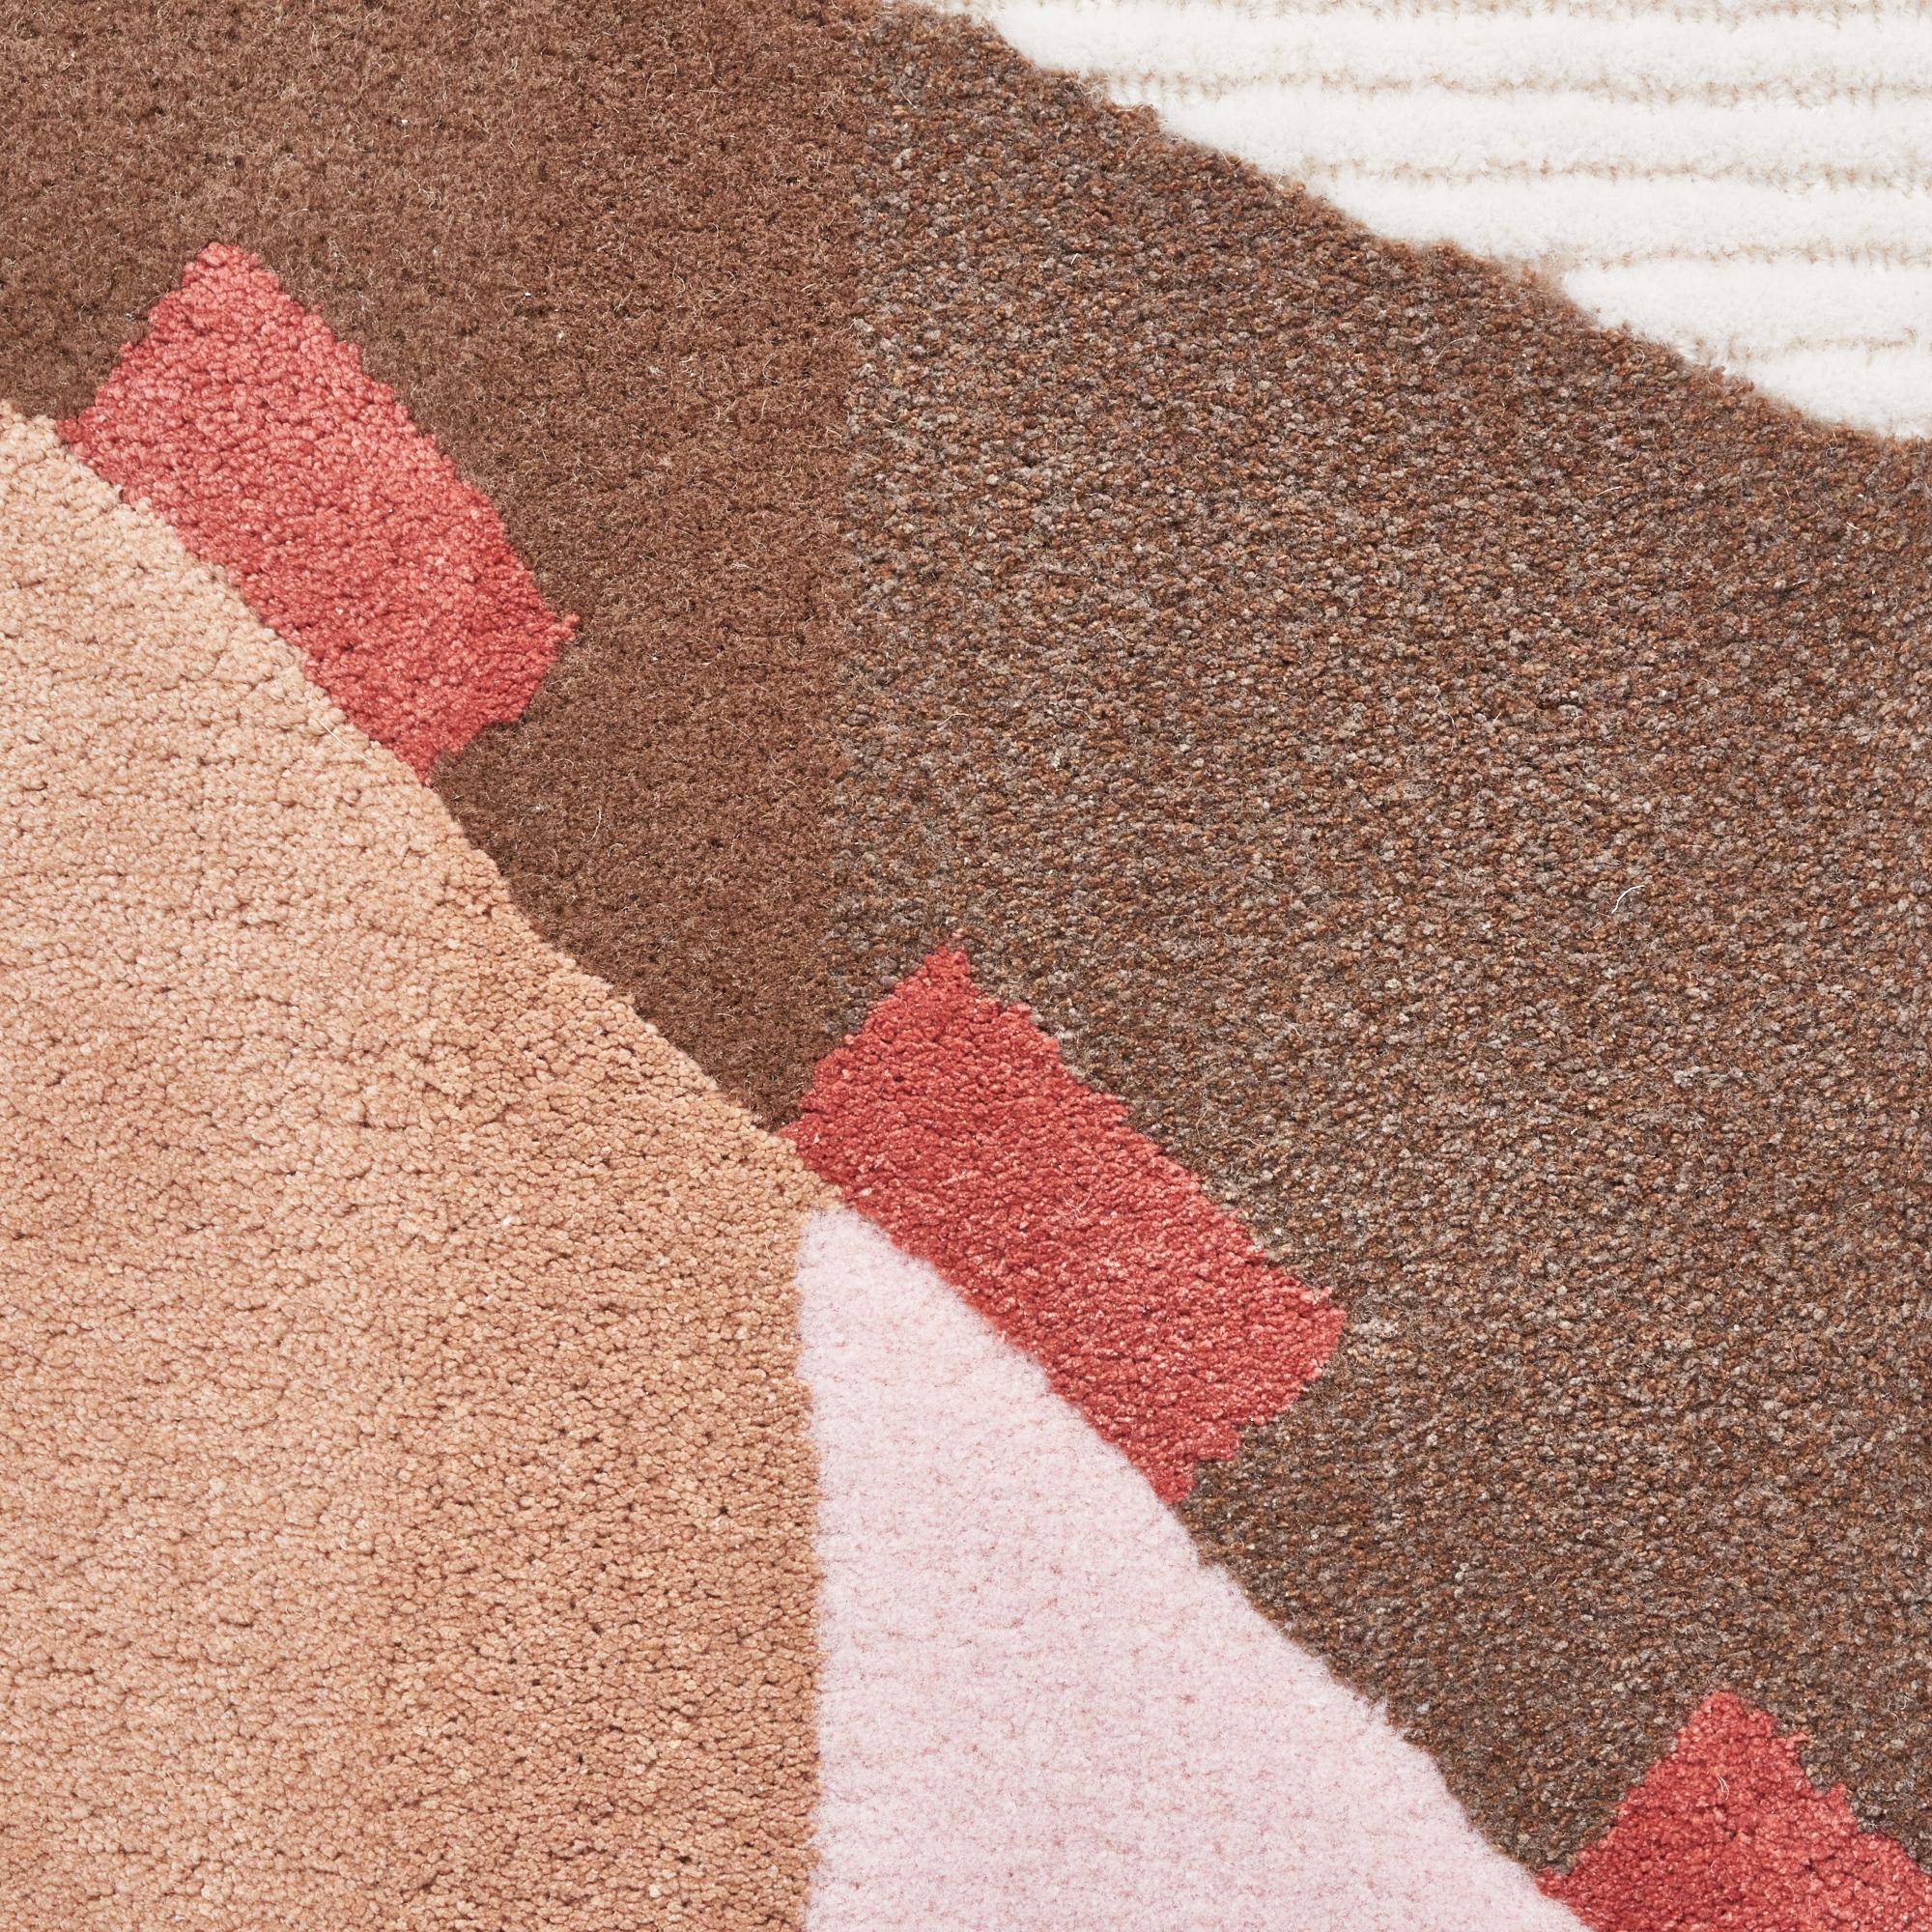 The rich compositions in this eye-catching collection owe their unique play of shapes and unexpected color combinations to the influence of the Memphis Group design movement. Made of hand-tufted merino wool, silk and faux silk, these rugs are as